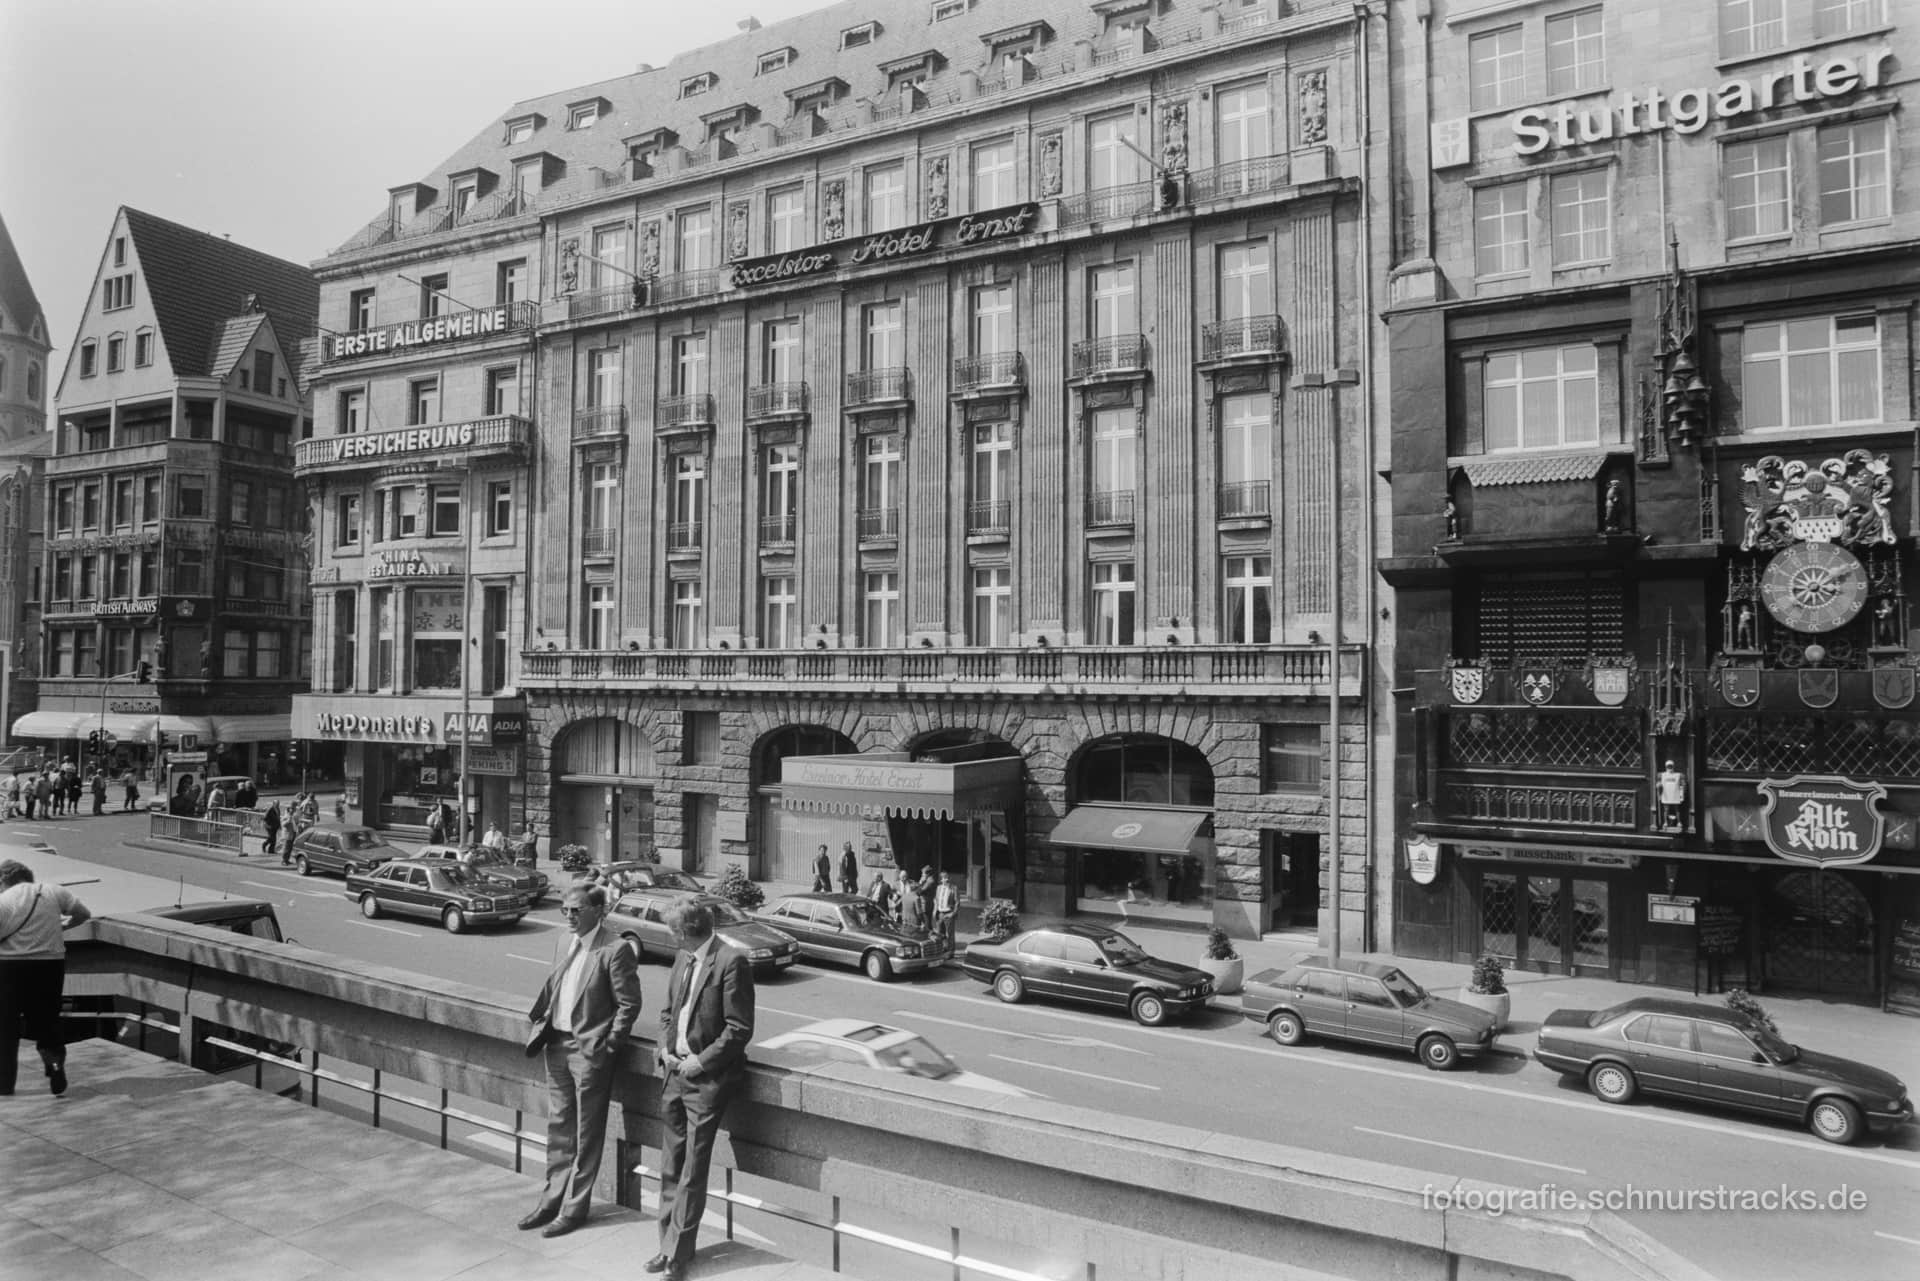 Excelsior Hotel Ernst and surrounding buildings 1989